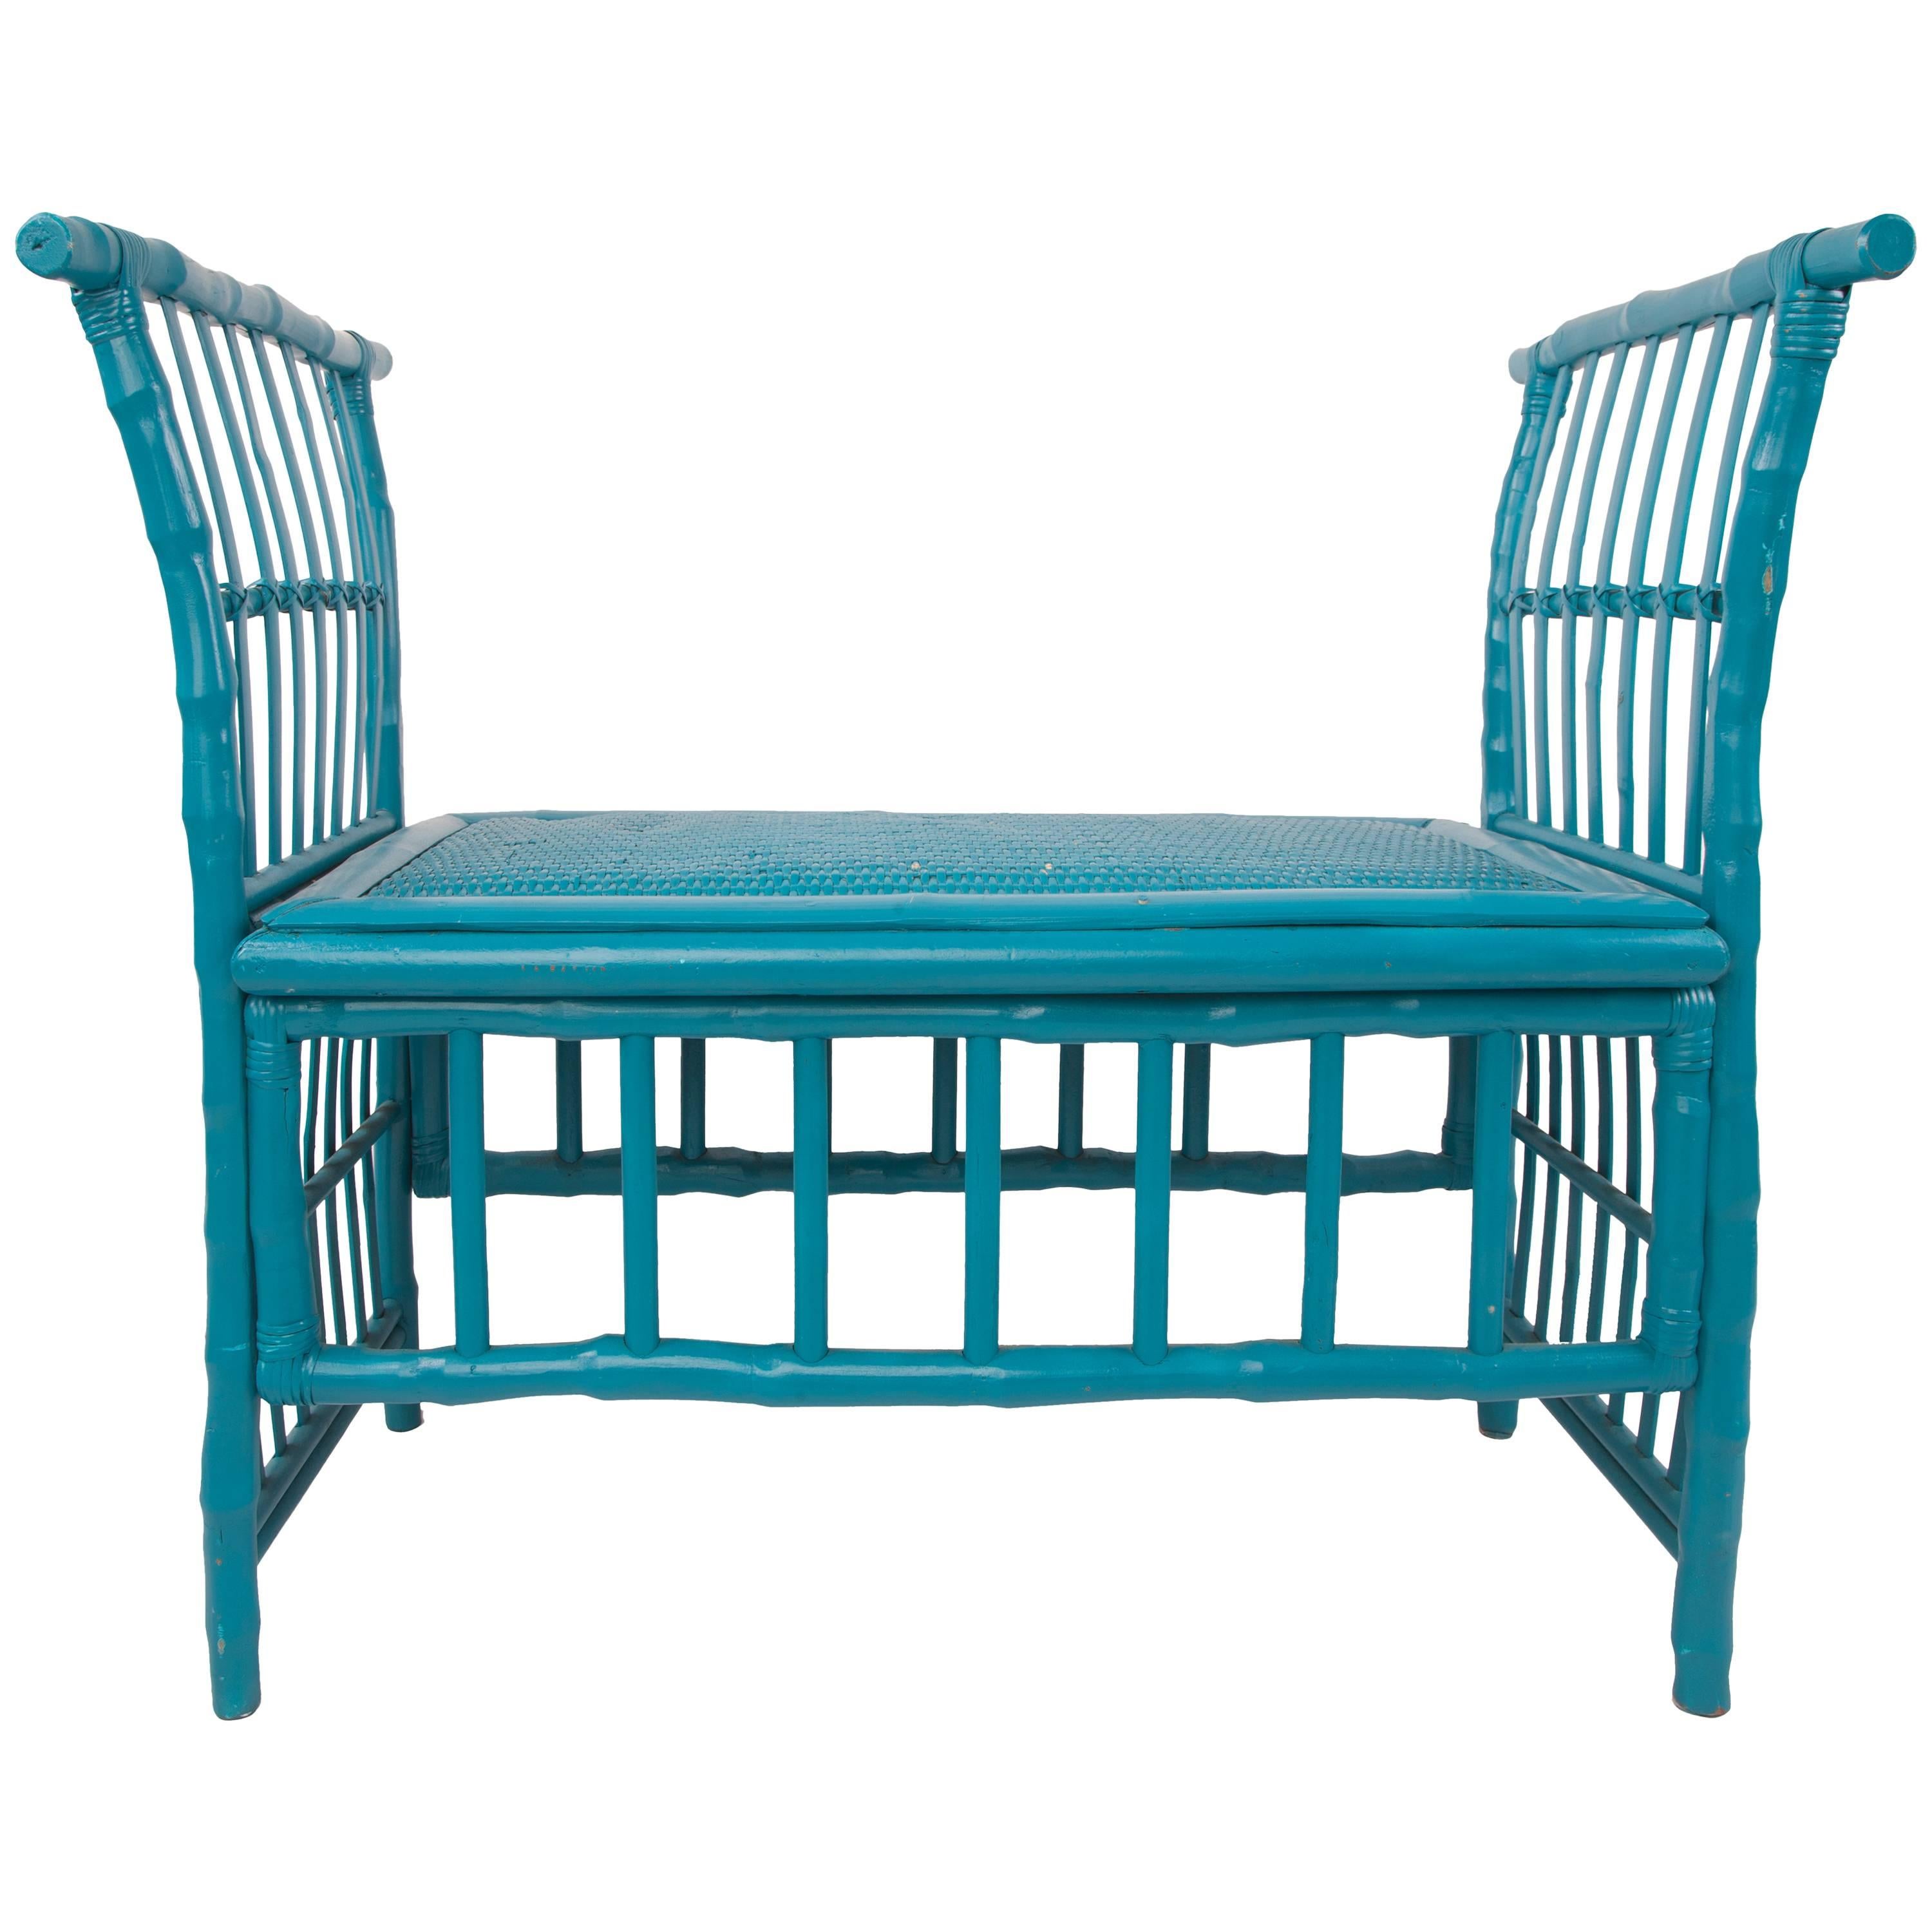 Fabulous Turquoise Rattan Bench For Sale